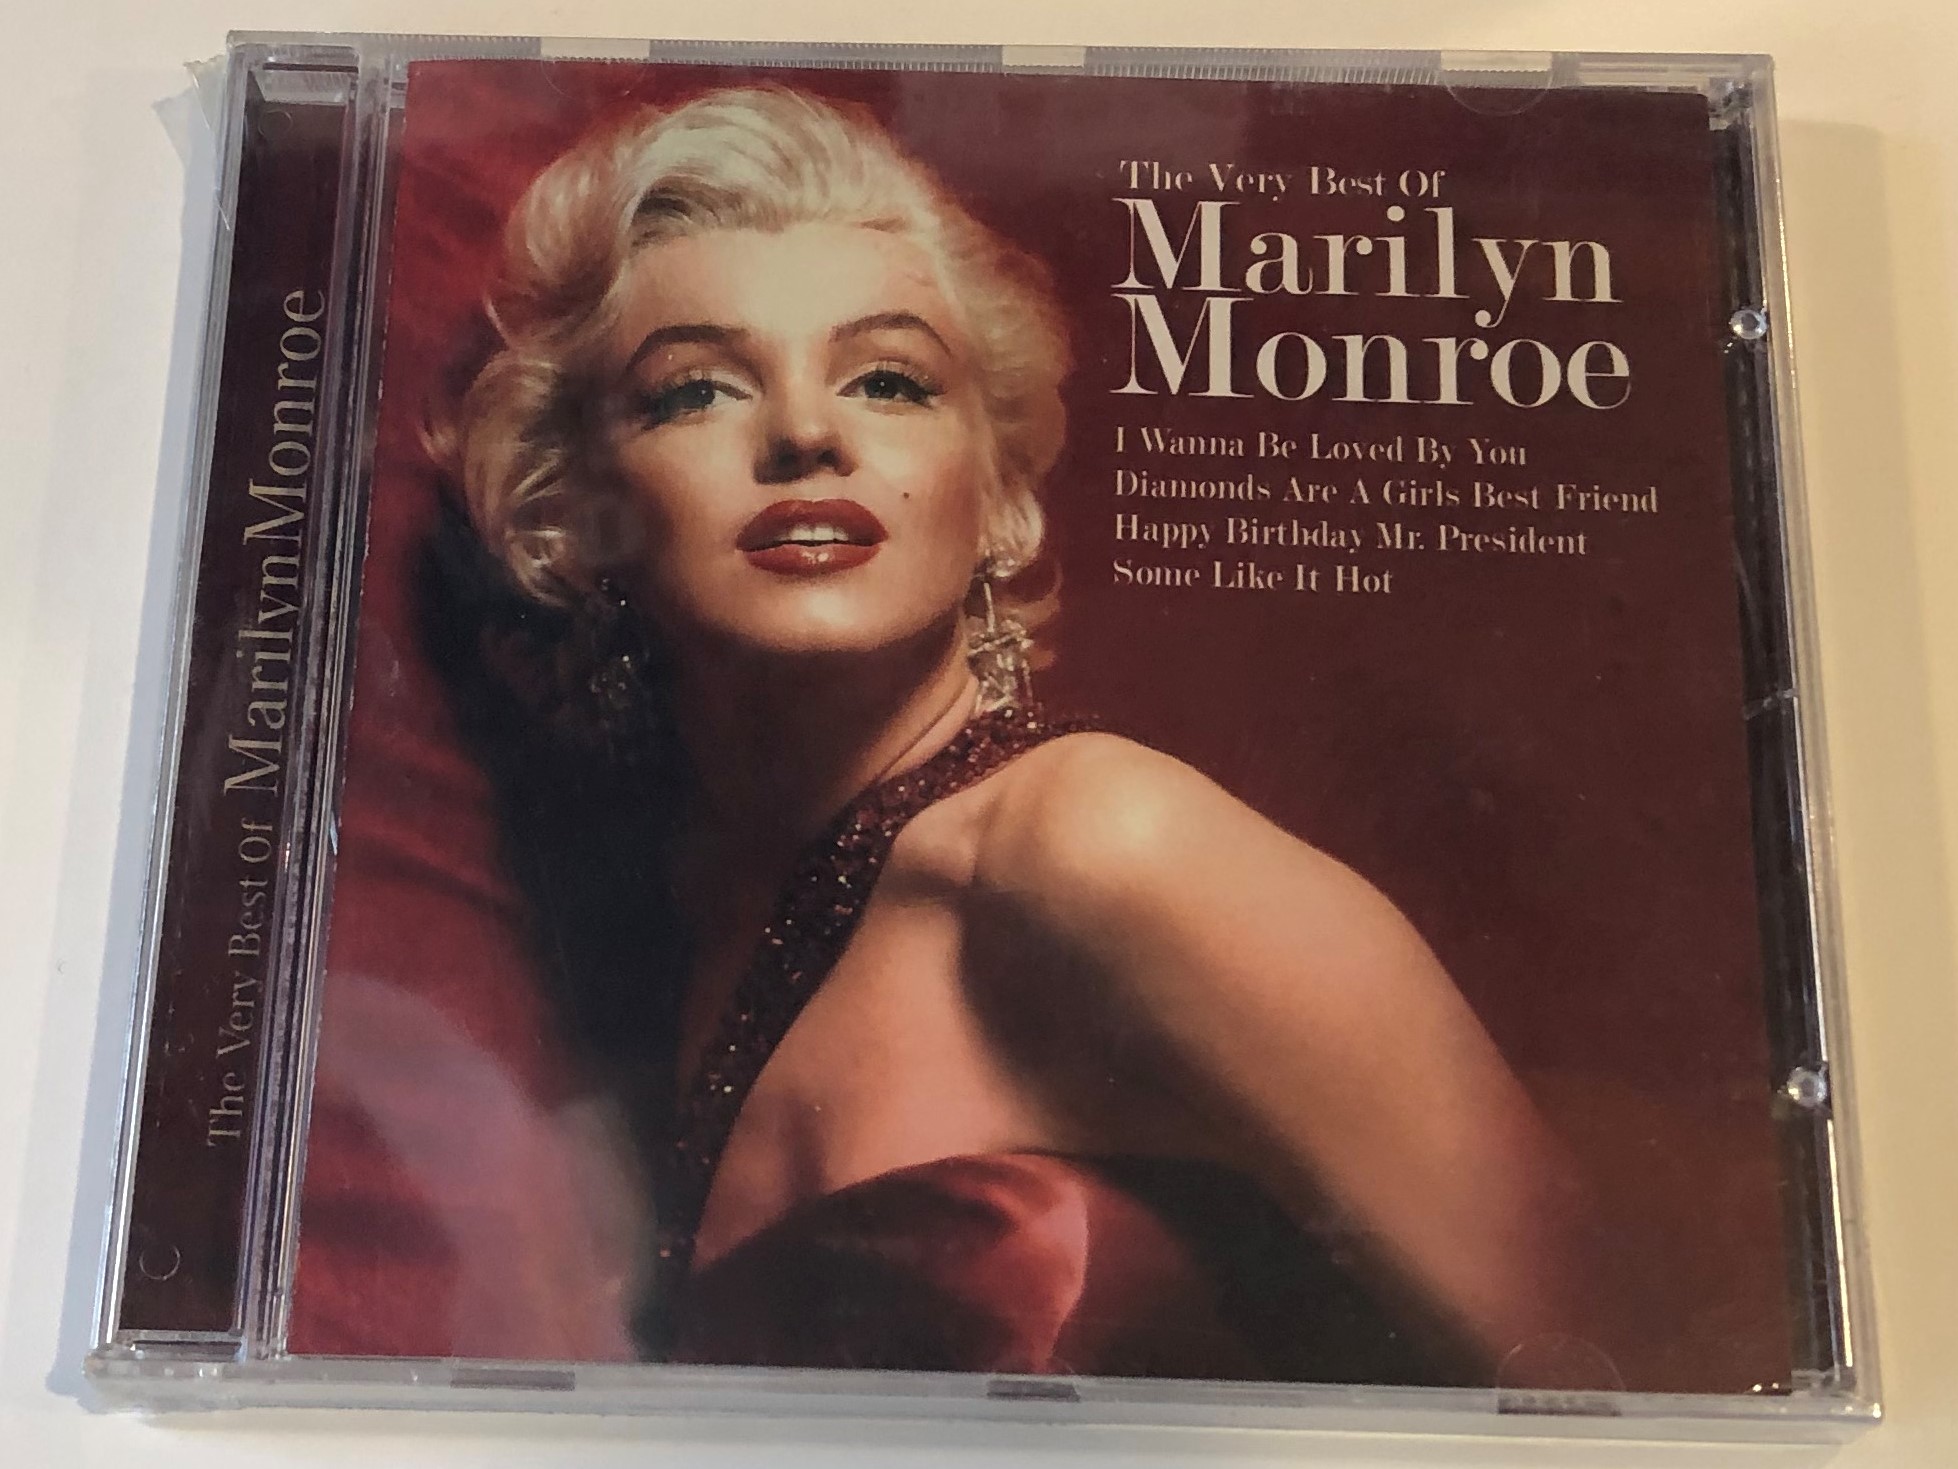 the-very-best-of-marilyn-monroe-i-wanna-be-loved-by-you-diamonds-are-a-girl-s-best-friend-happy-birthday-mr.-president-some-like-it-hot-time-music-international-ltd.-audio-cd-2004-5033606034-1-.jpg